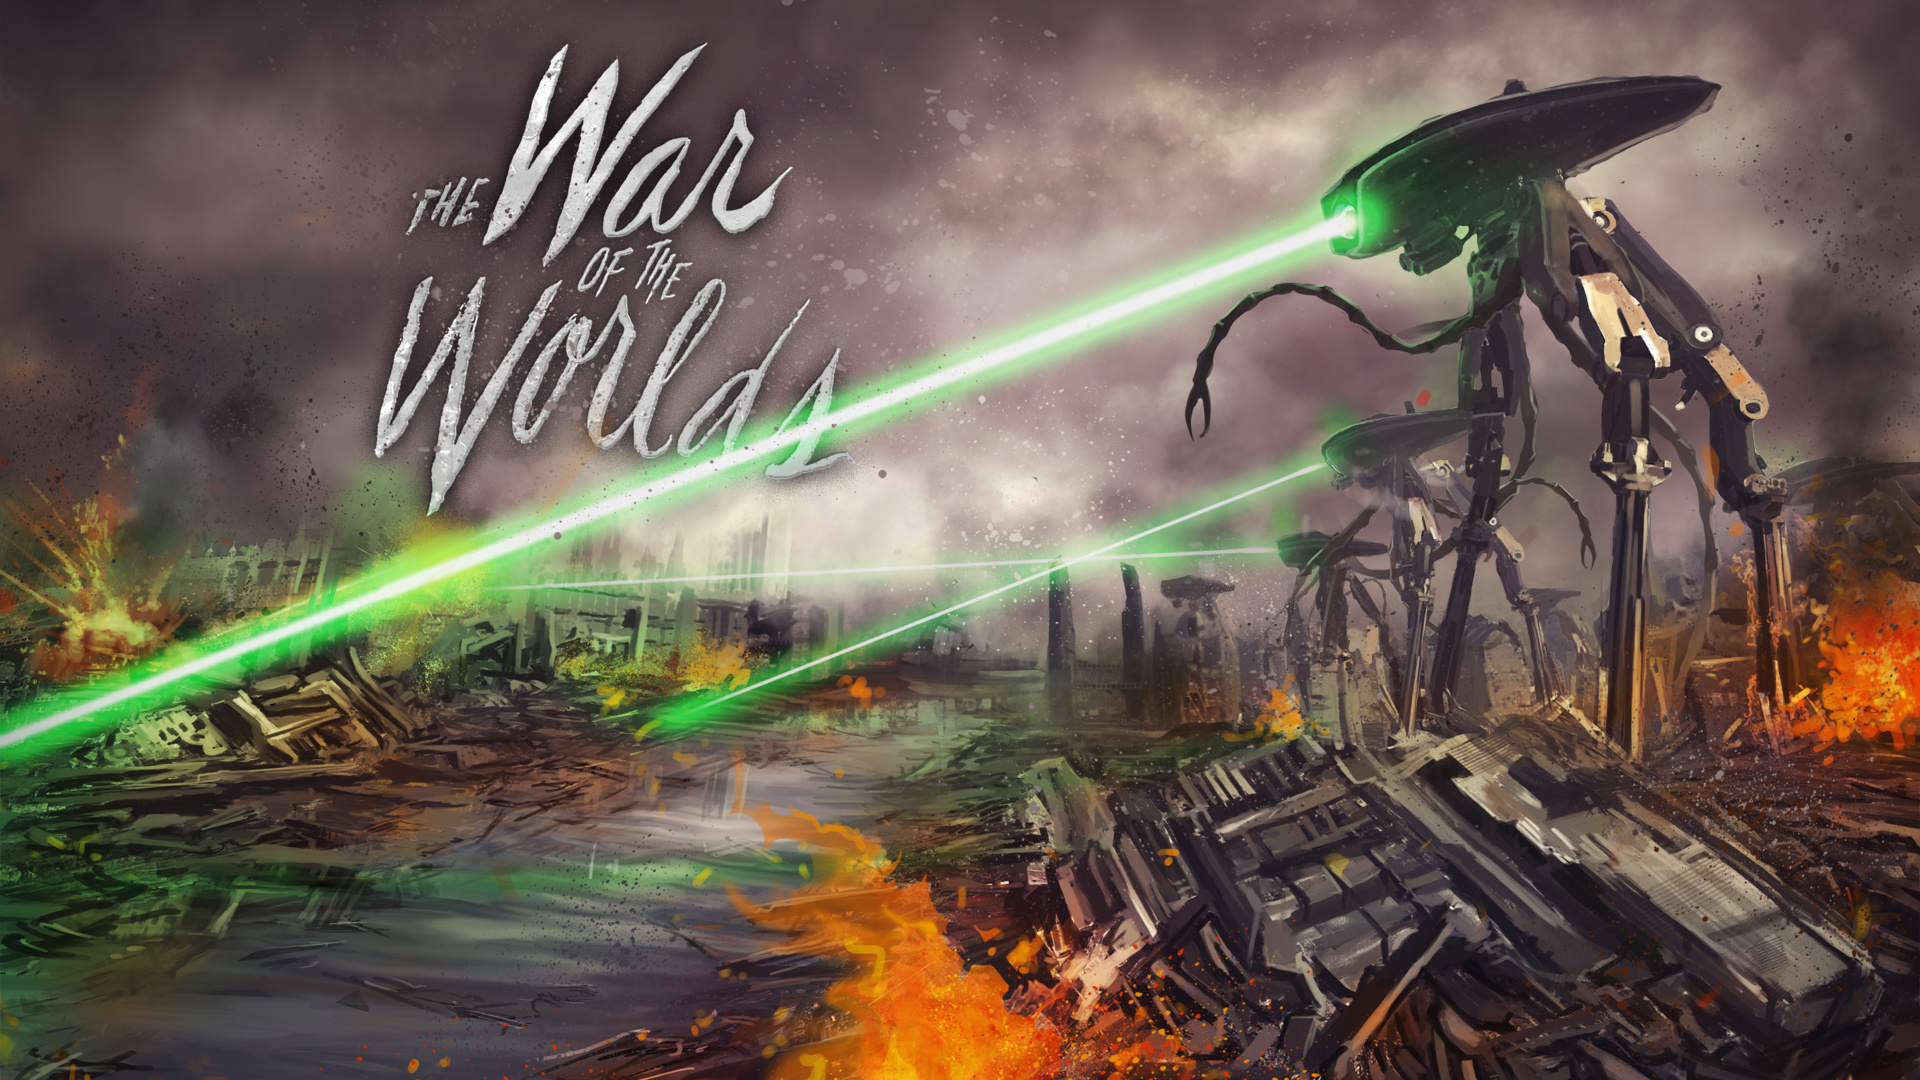 War of the Worlds, Movie Wallpaper, HQ Pictures, 4K Wallpapers, 1920x1080 Full HD Desktop